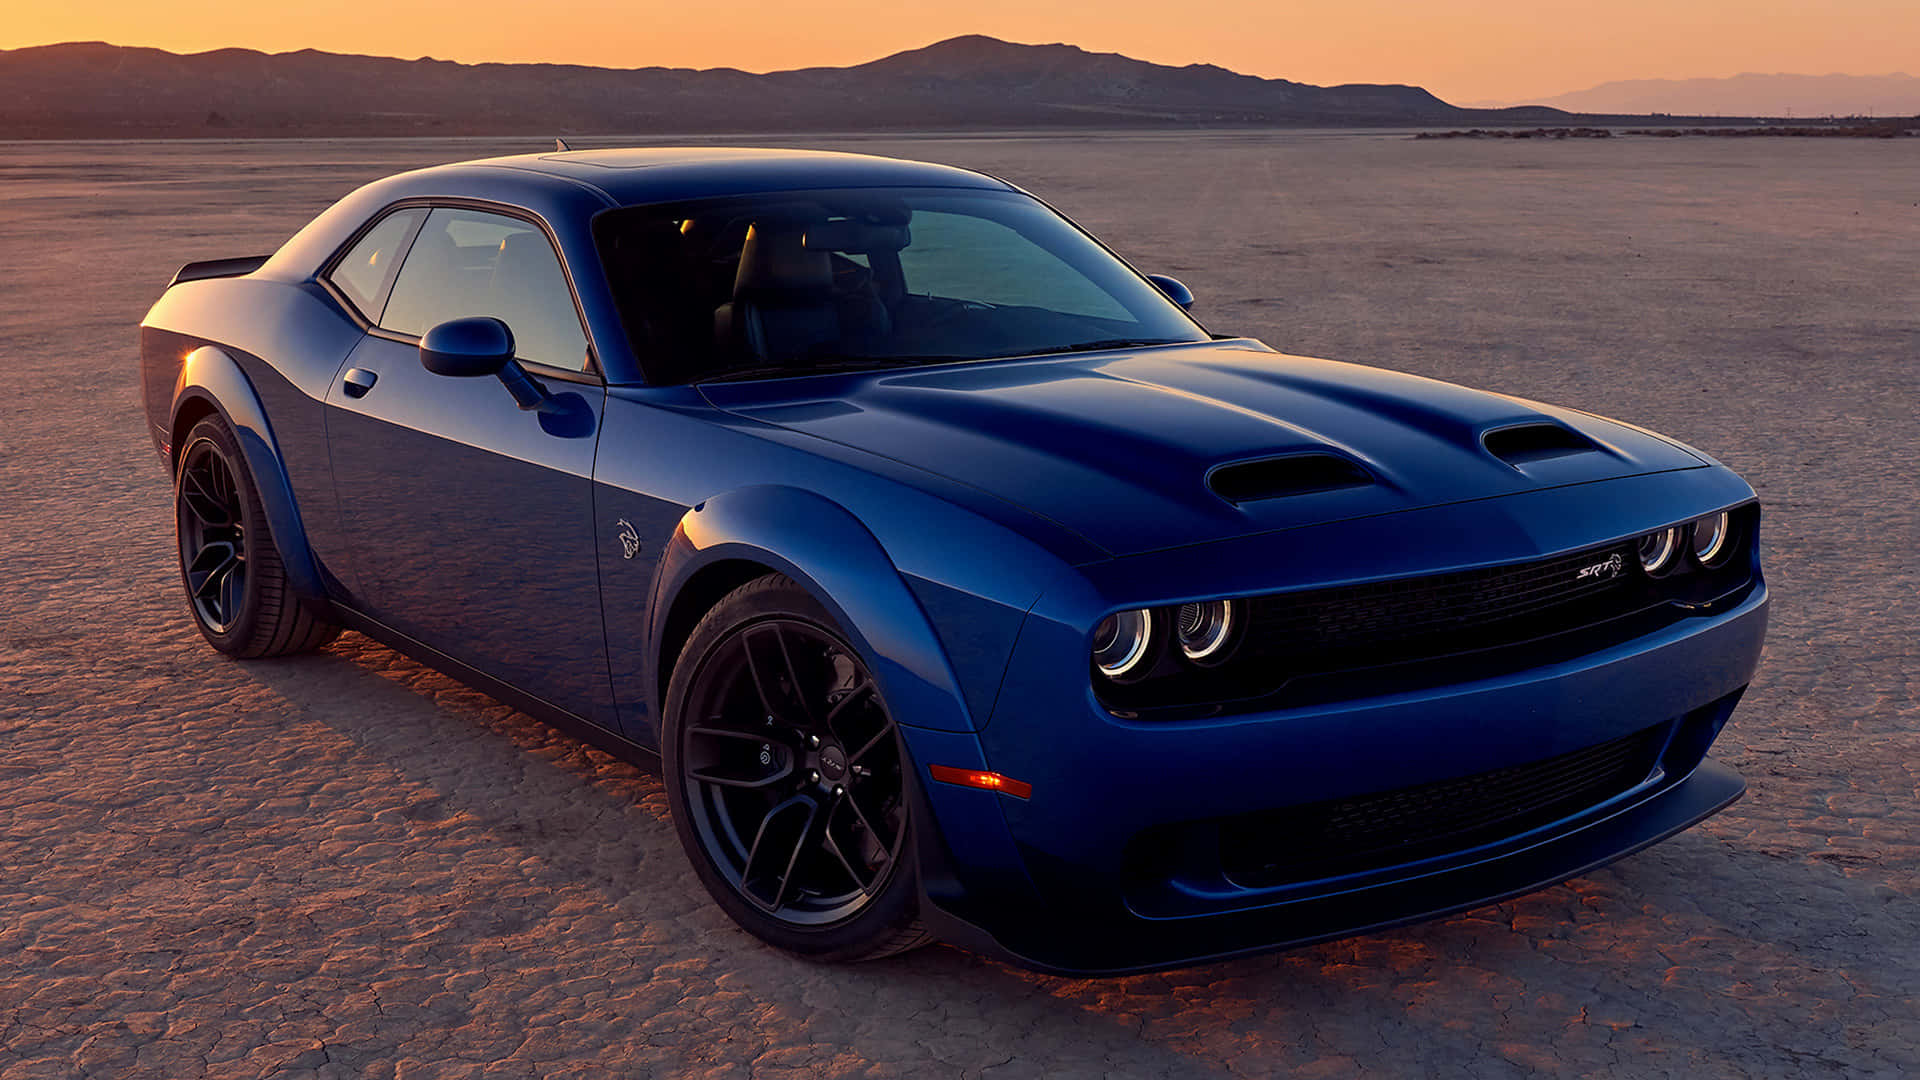 Get behind the power of the Hellcat Wallpaper